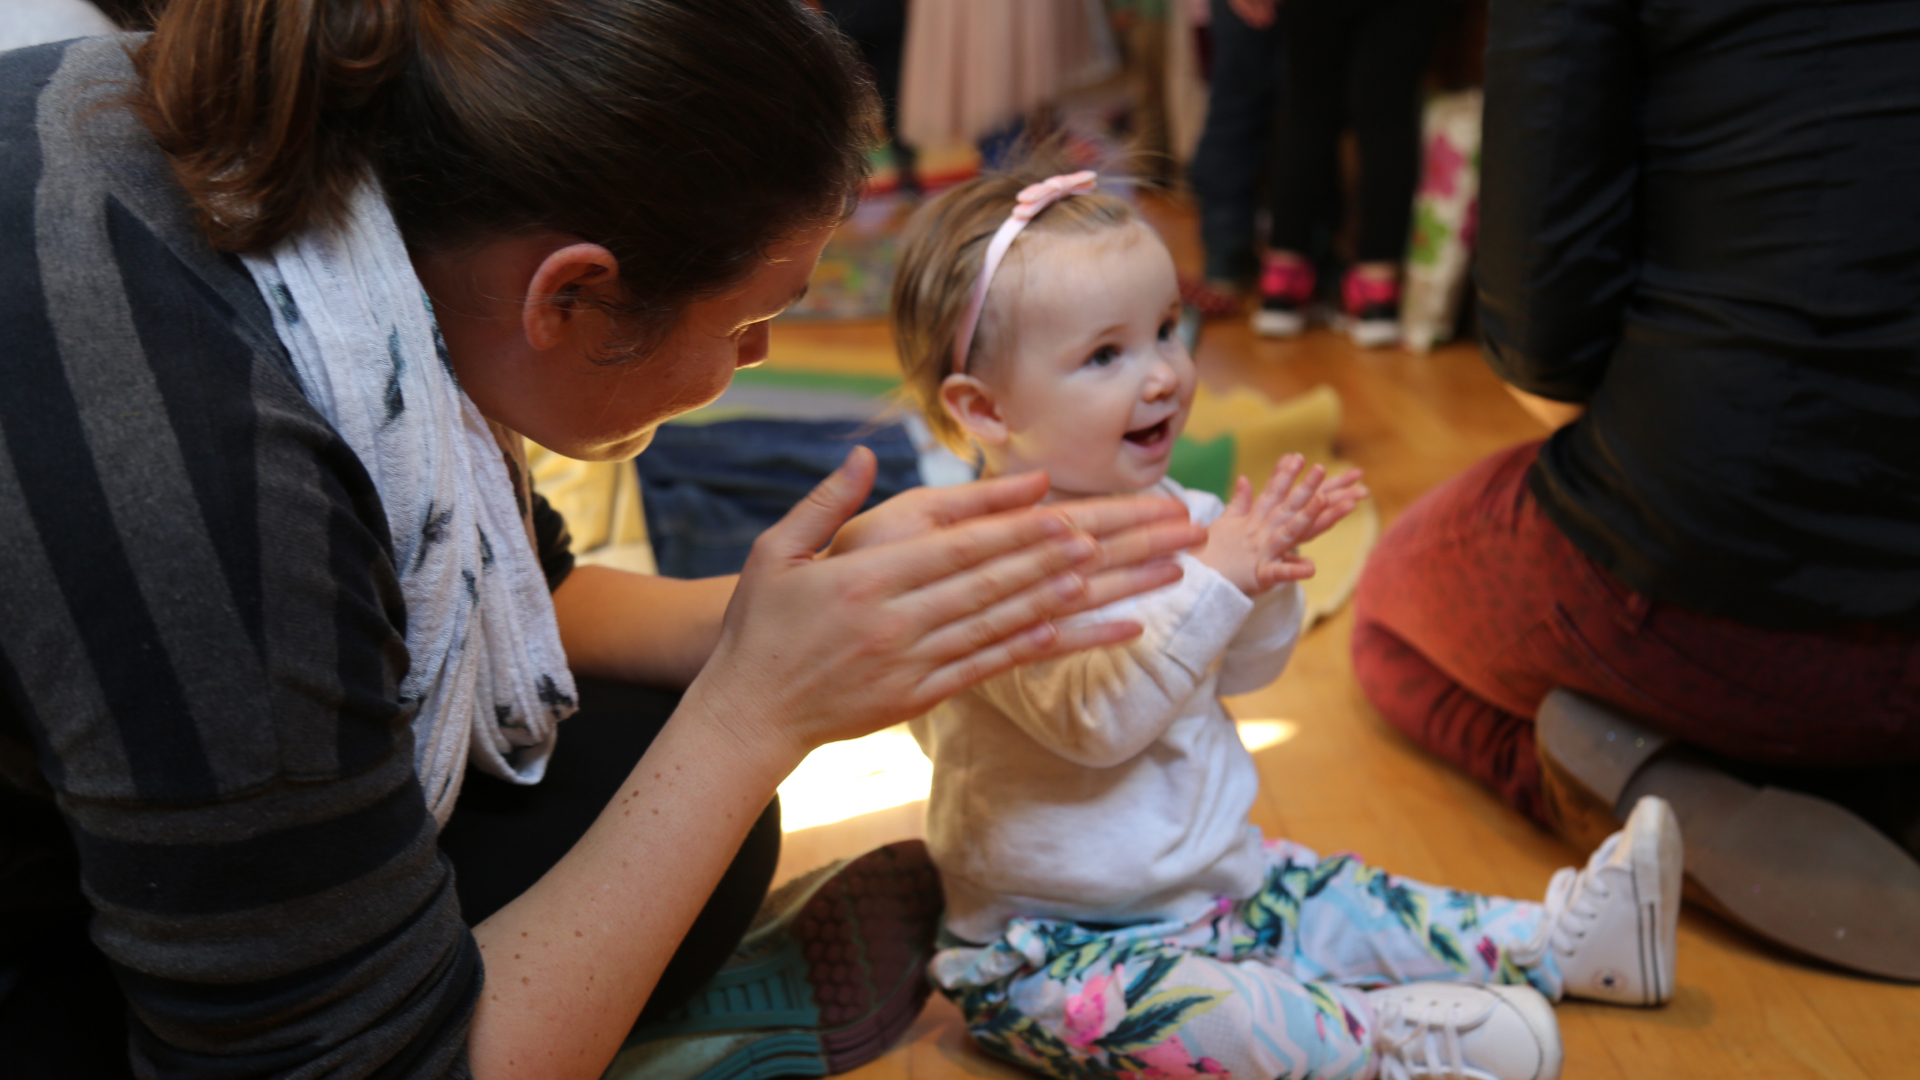 A baby and their parent sit on the floor looking happy and clapping.